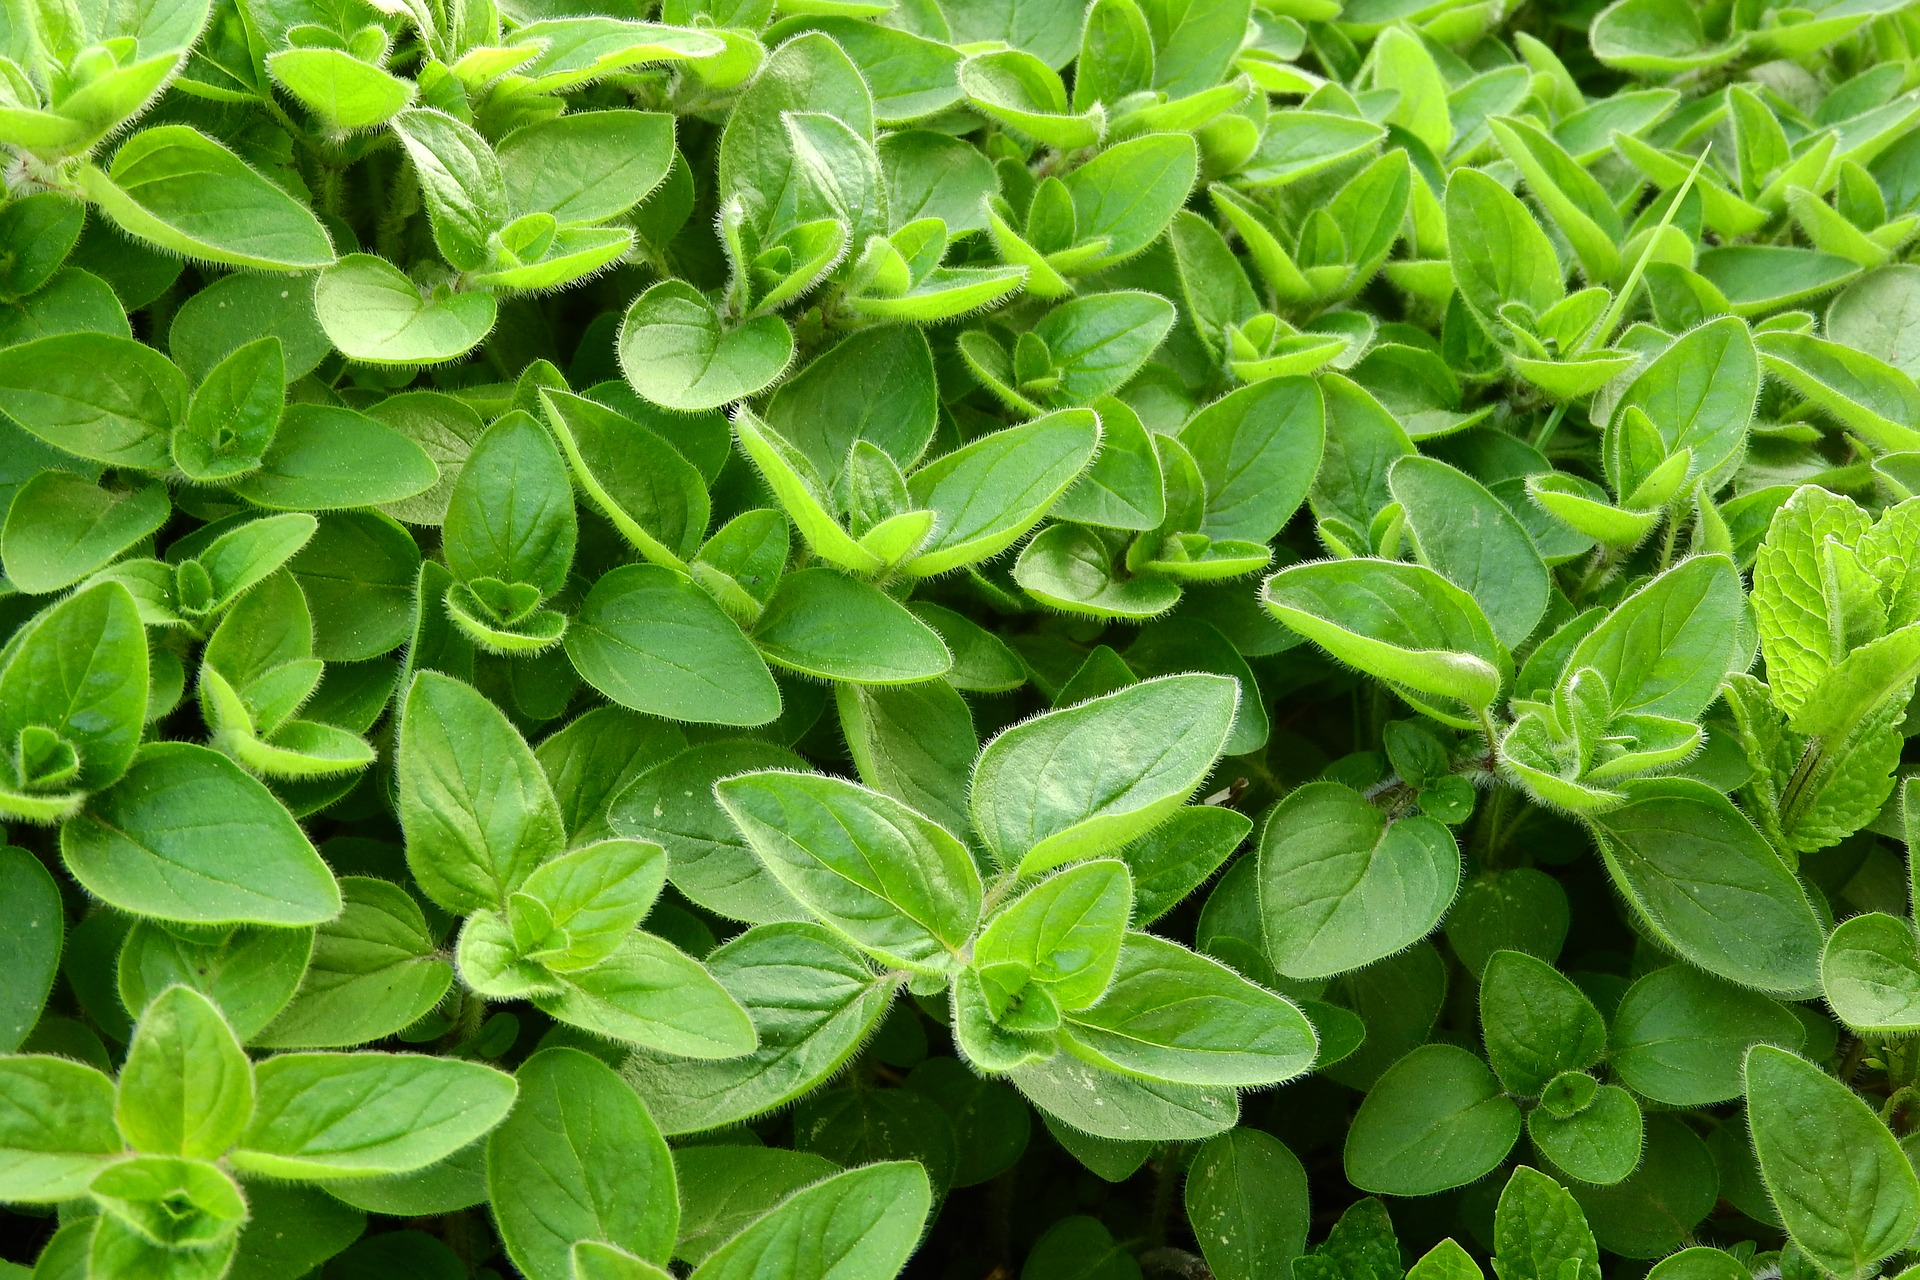 Marjoram is anti-inflammatory and purported to increase milk supply